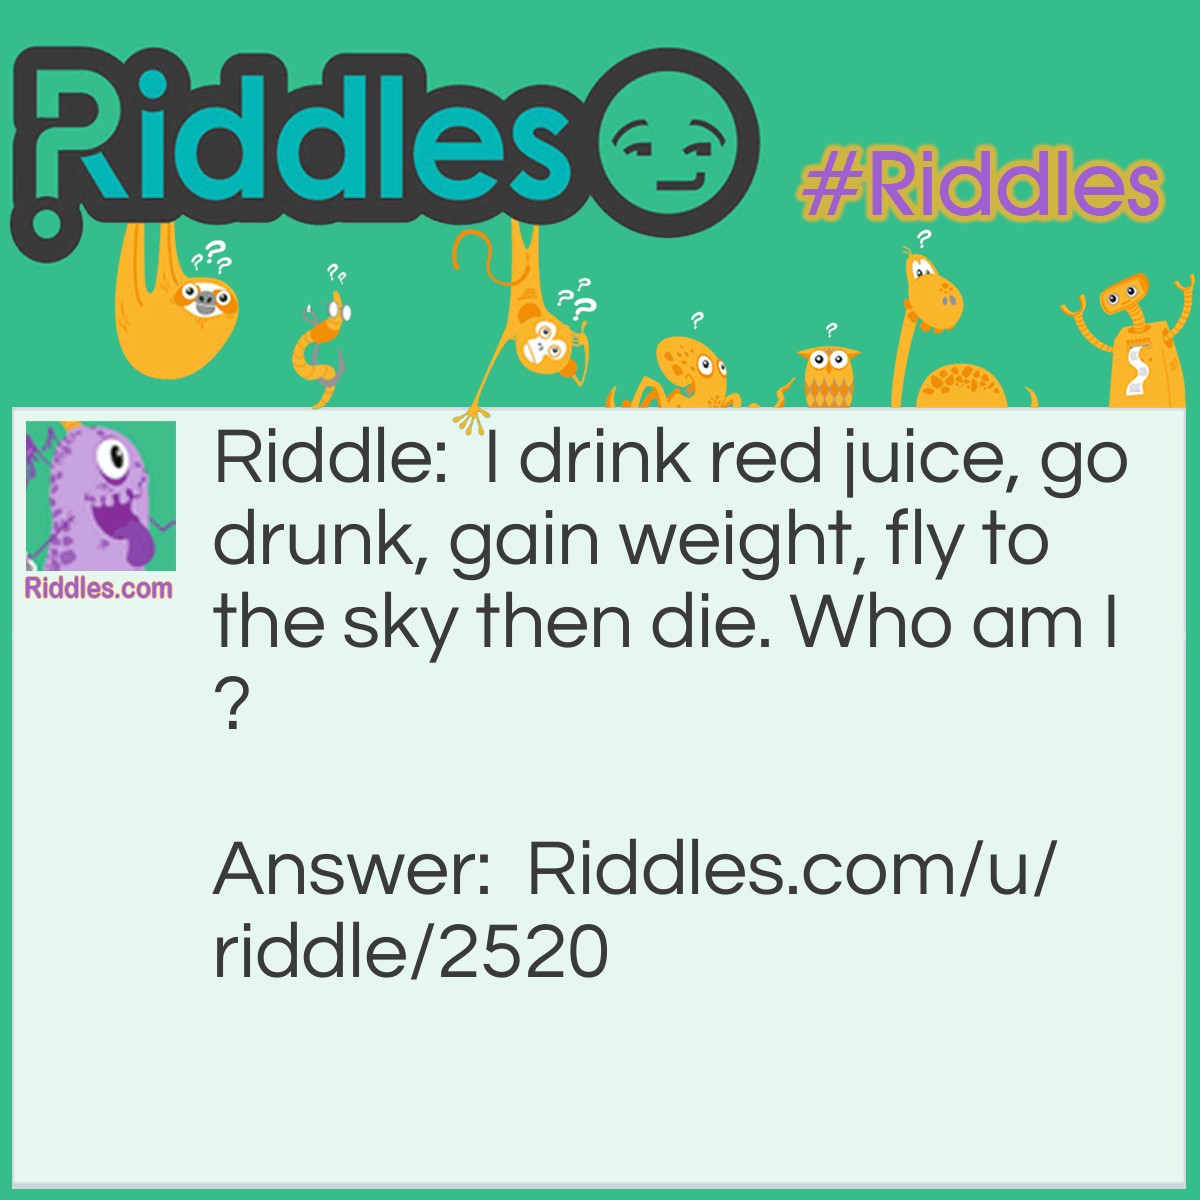 Riddle: I drink red juice, go drunk, gain weight, fly to the sky then die. Who am I? Answer: A mosquito!